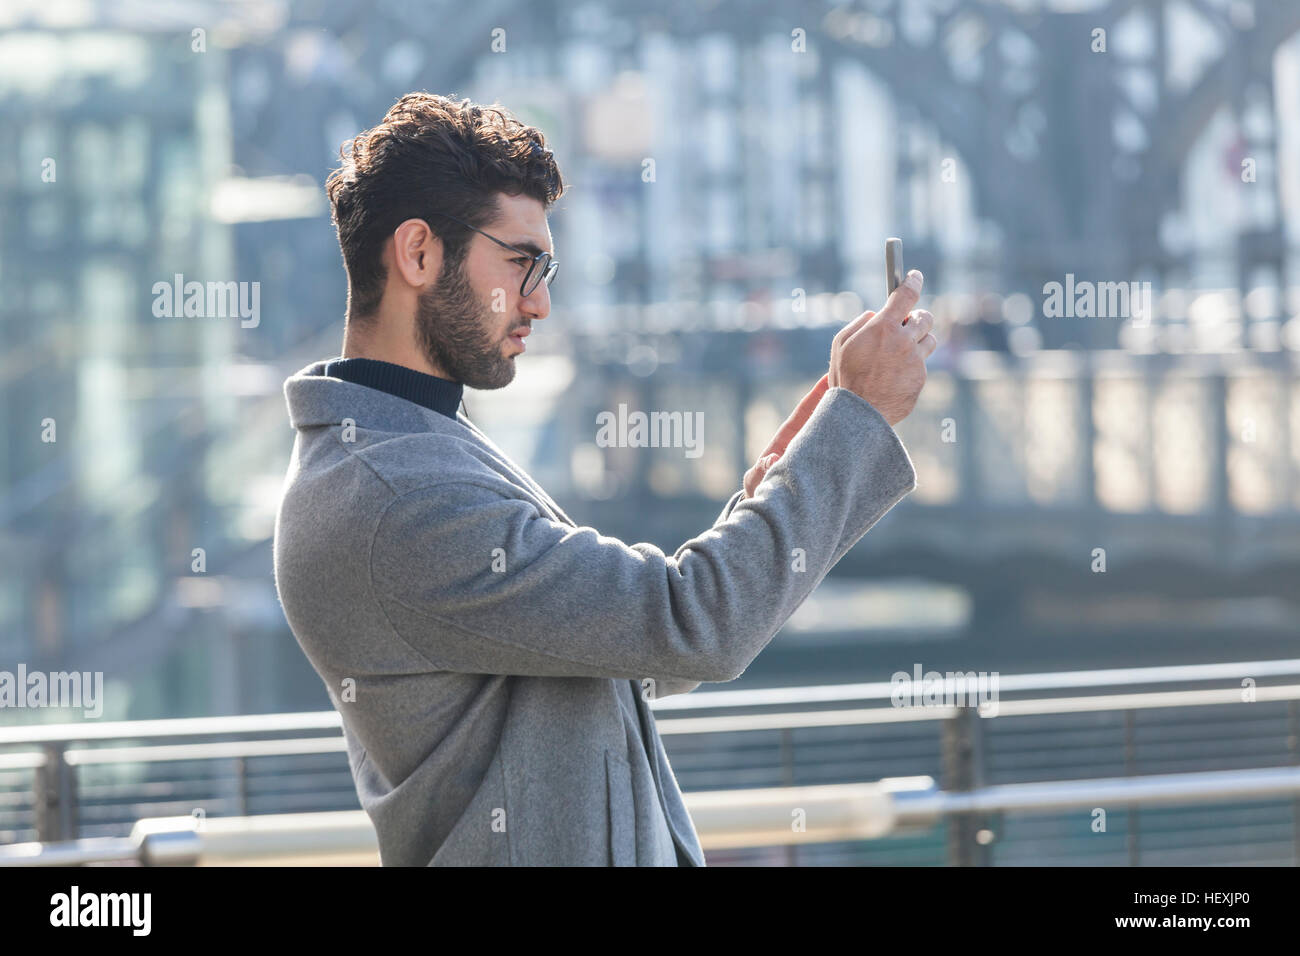 Young businessman taking picture with smartphone Stock Photo